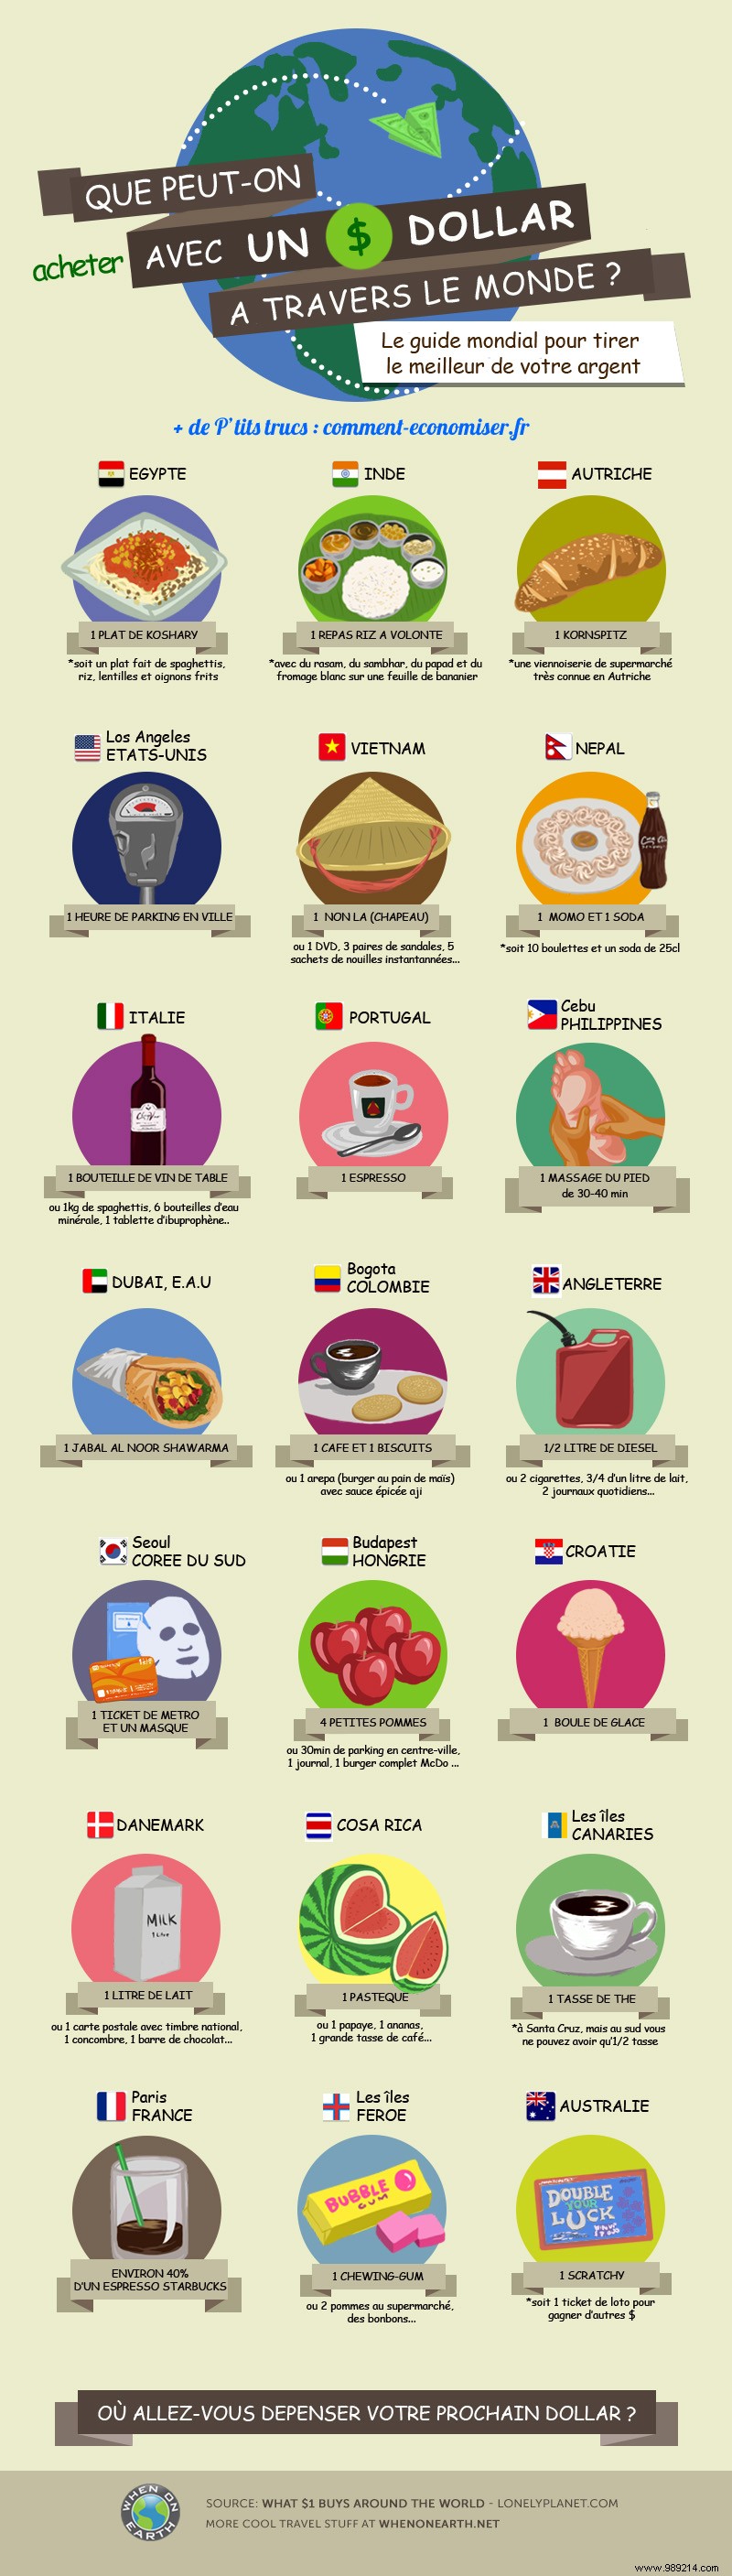 What Can You Buy With 1 Dollar Around The World? 